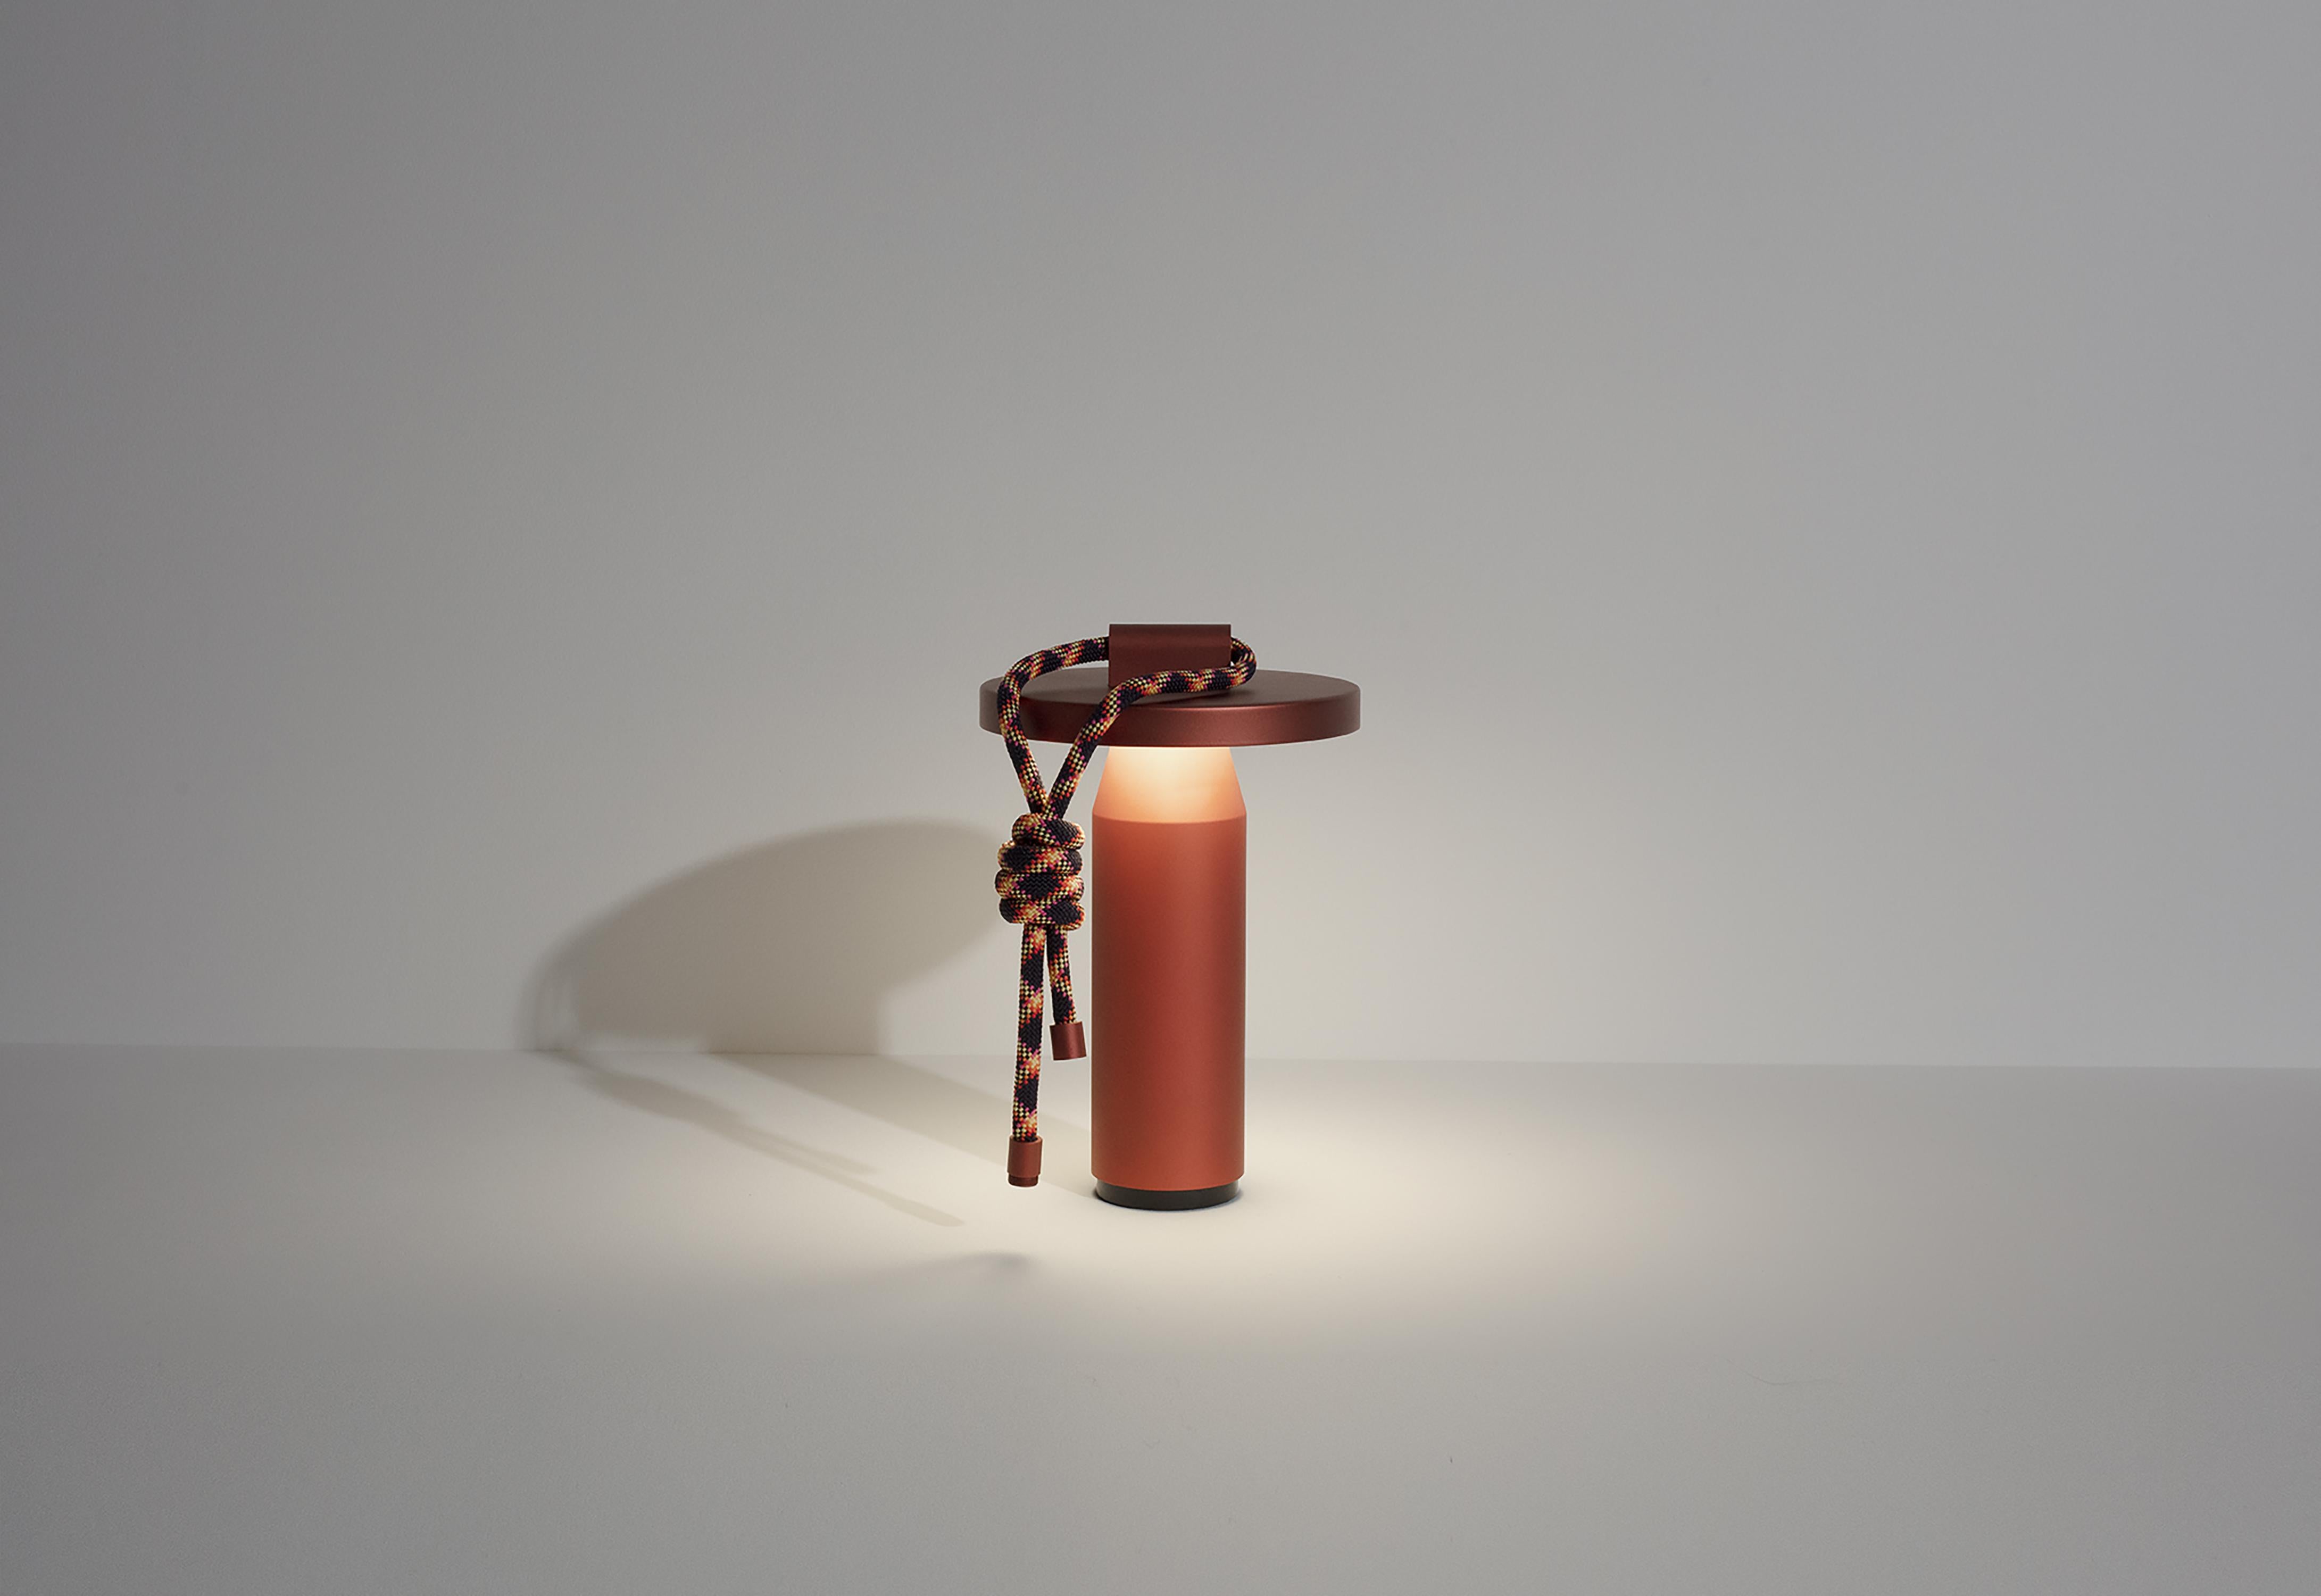 Contemporary Petite Friture Quasar Portable Table Lamp in Sienna Aluminium by Samy Rio For Sale